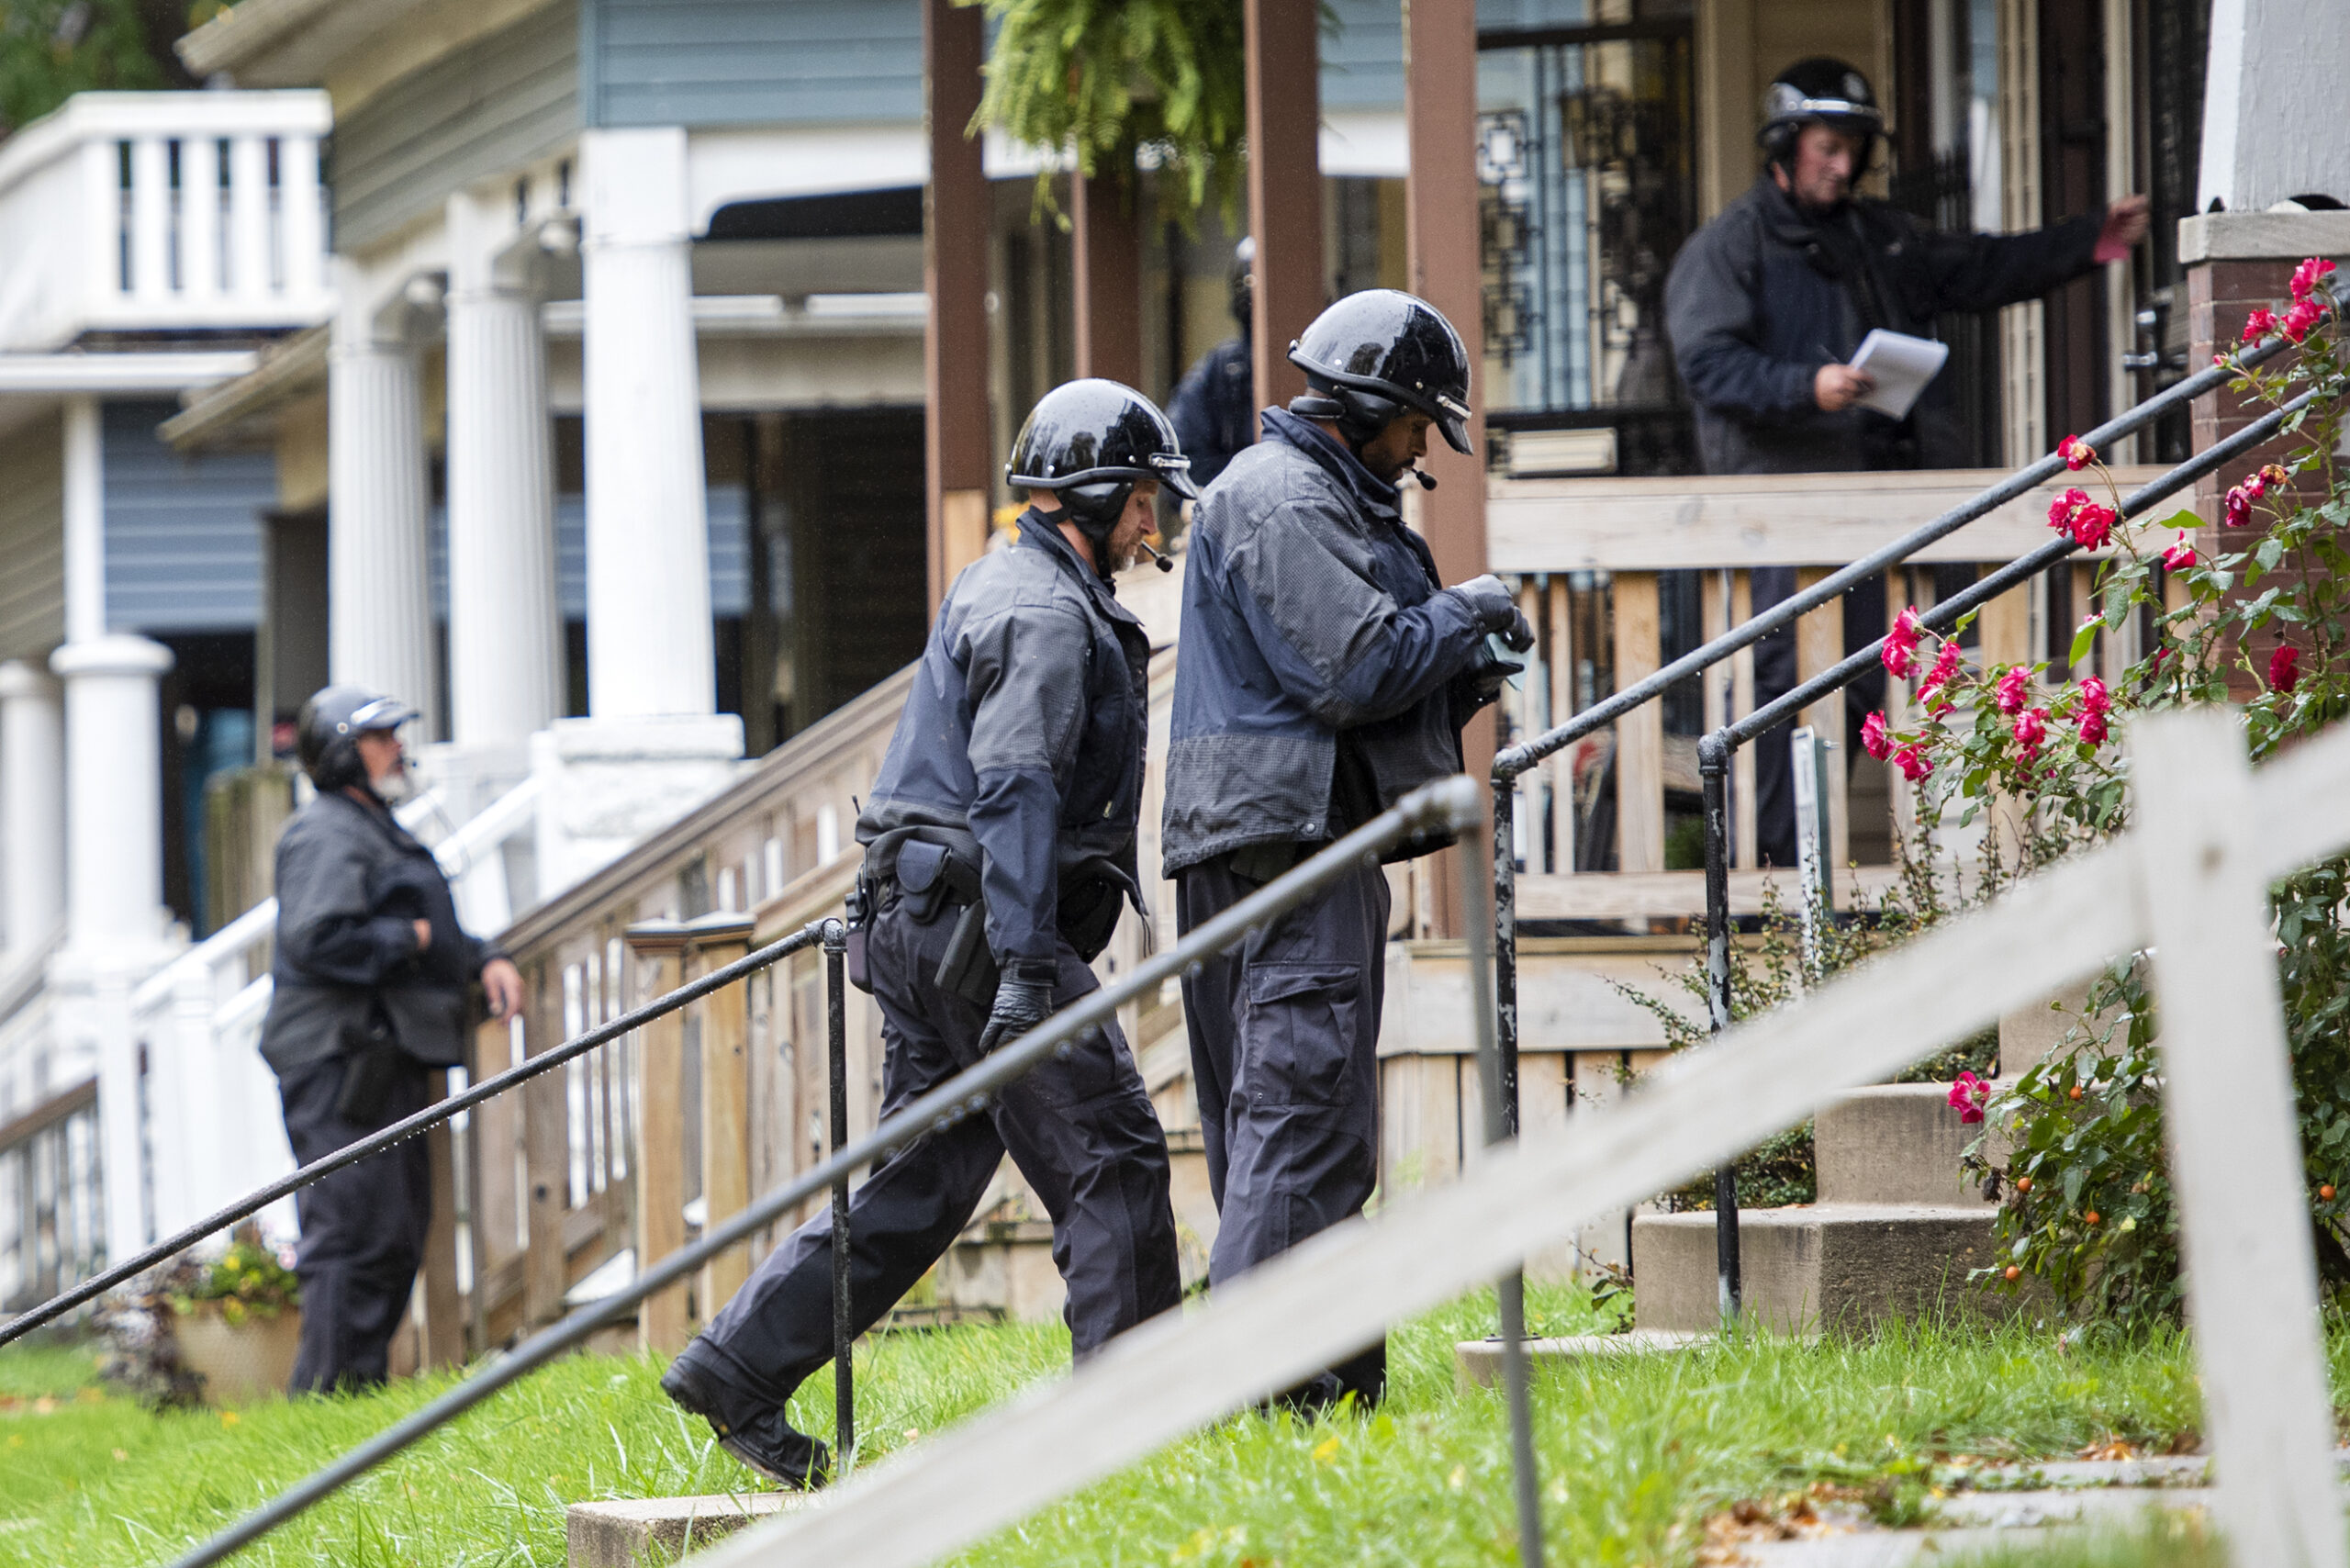 Officers in uniform climb steps to reach the front doors of homes.